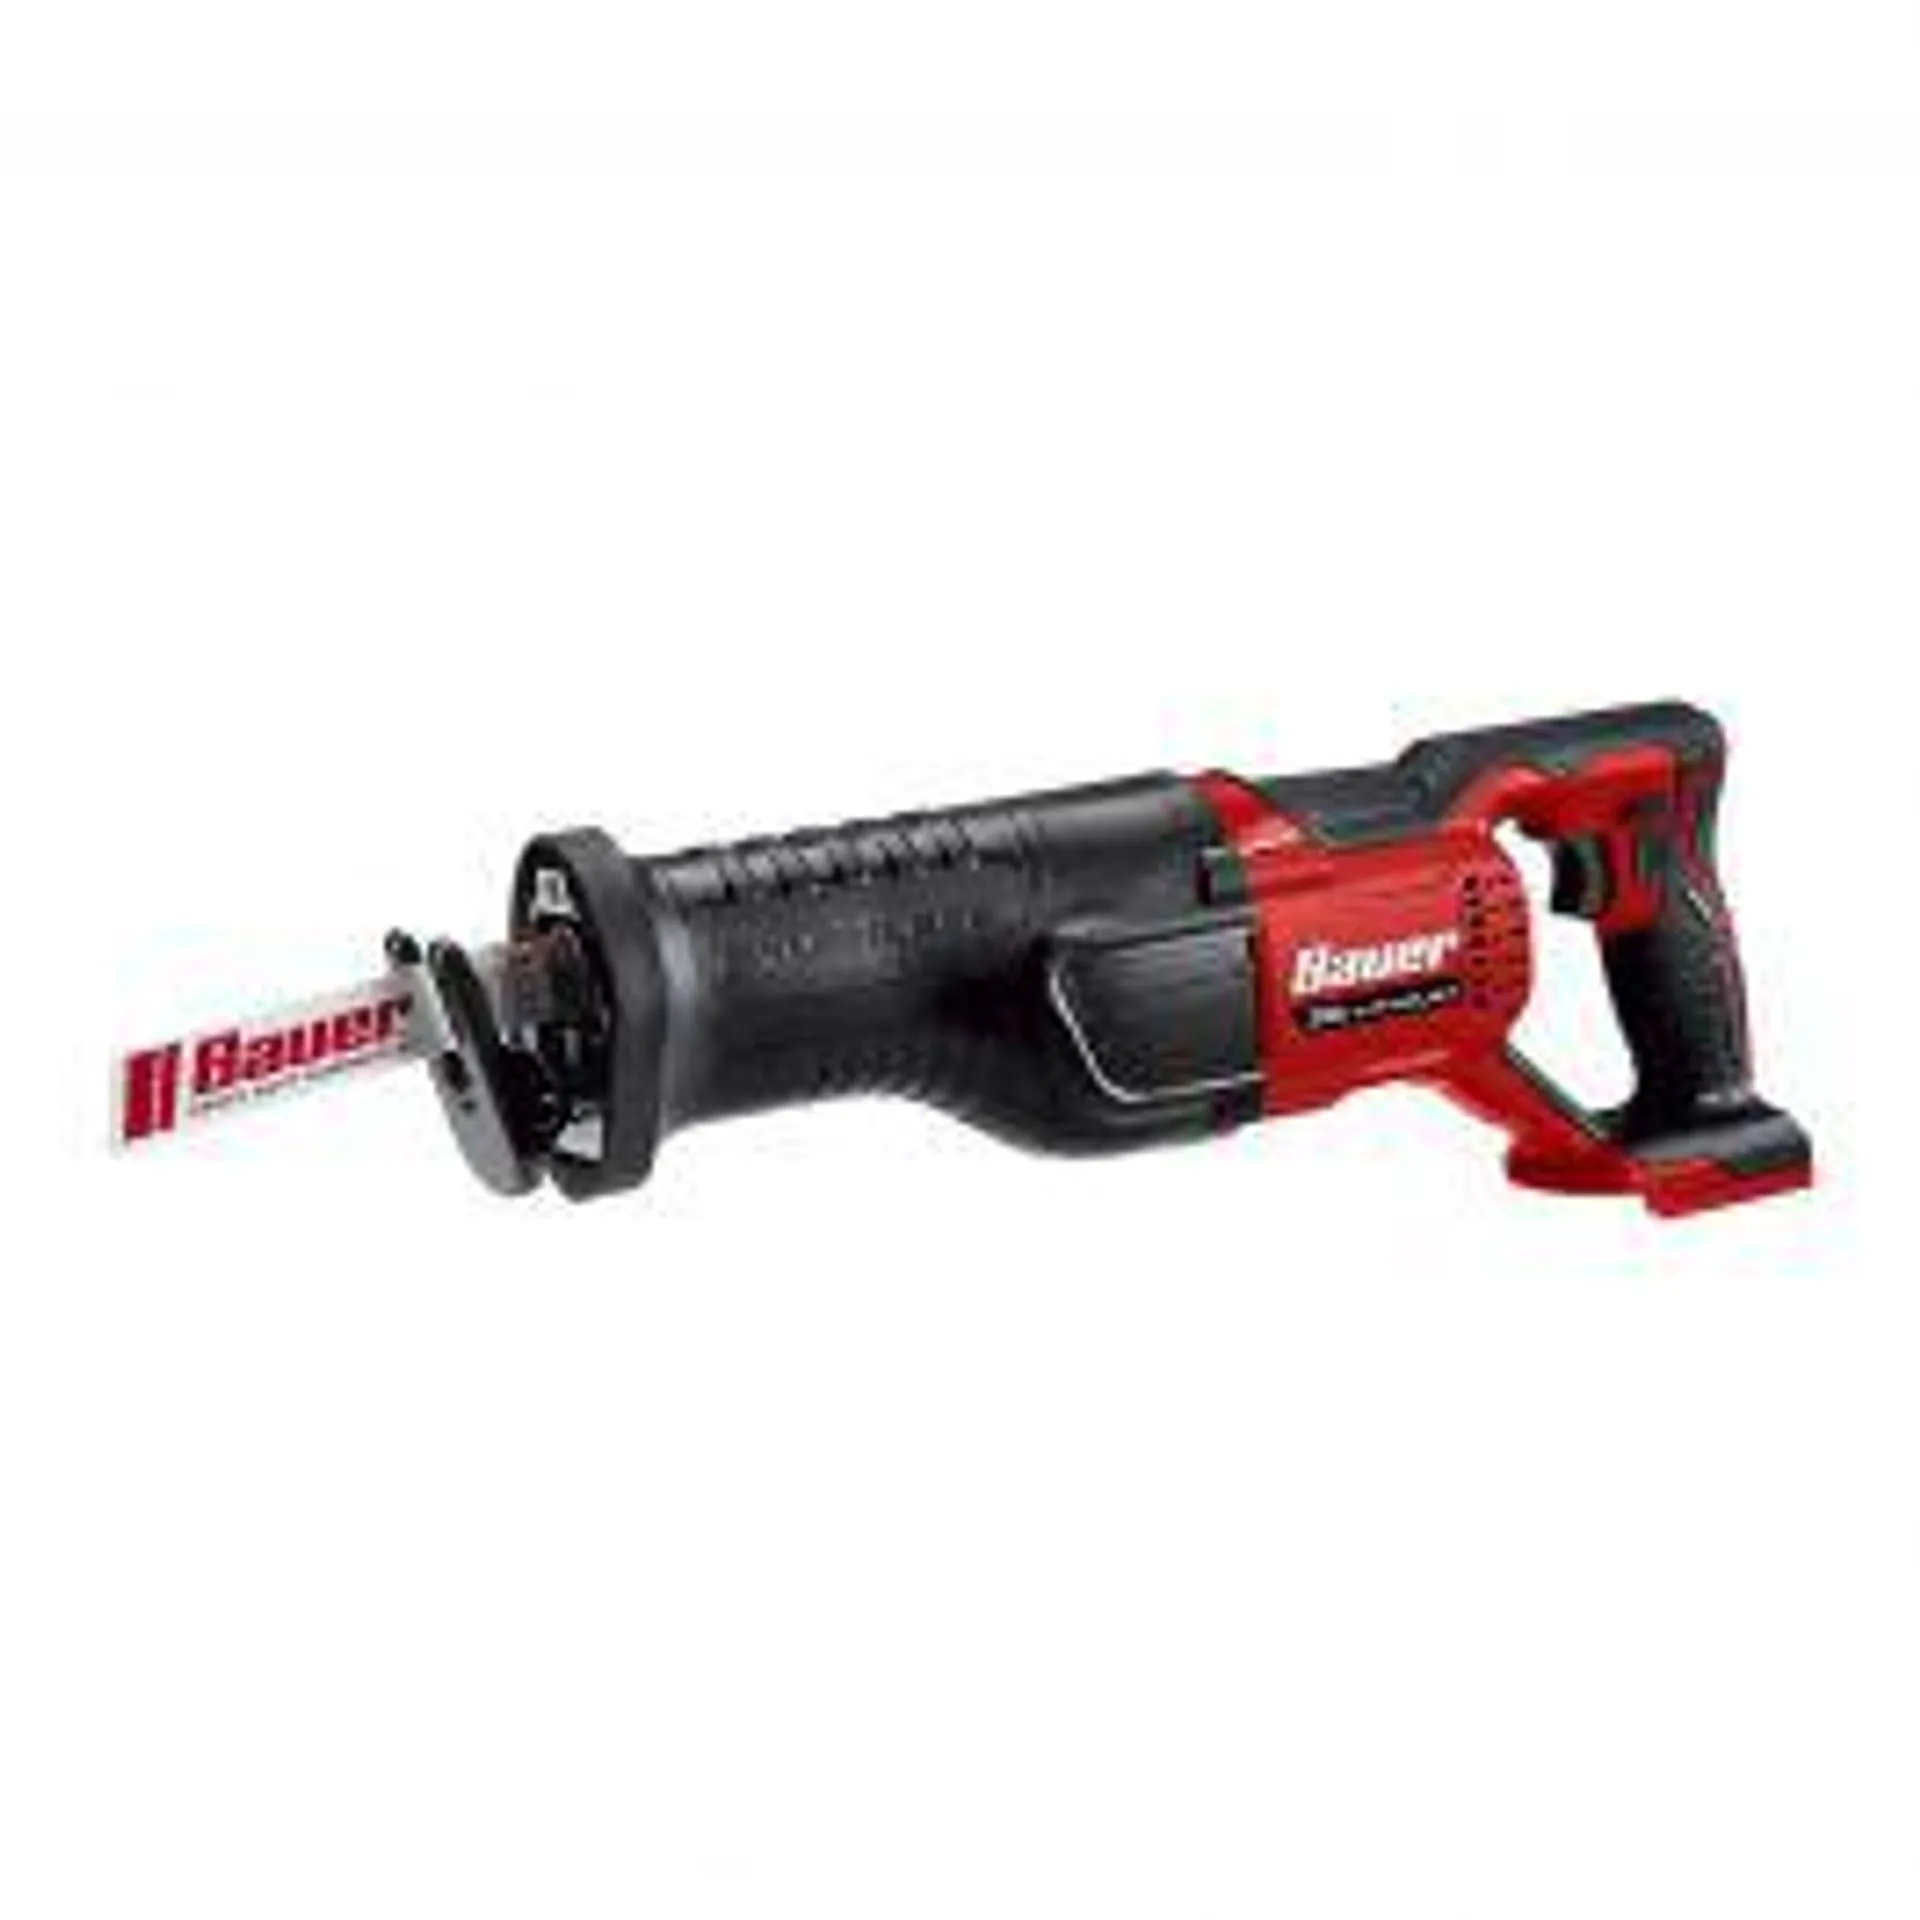 20V Brushless Cordless Reciprocating Saw - Tool Only